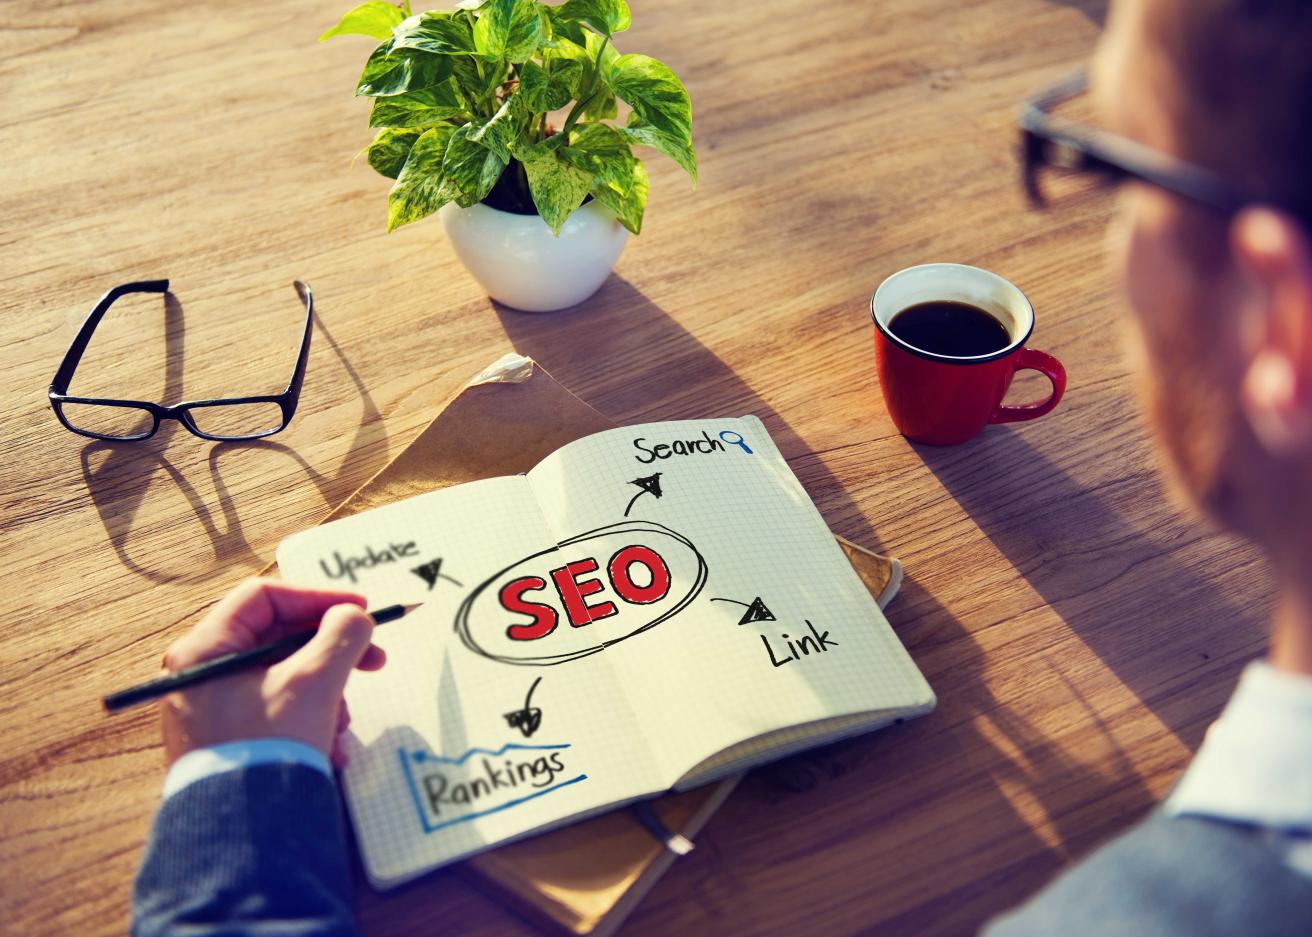 What Are The Best Ways To Market Myself As A Freelance SEO?